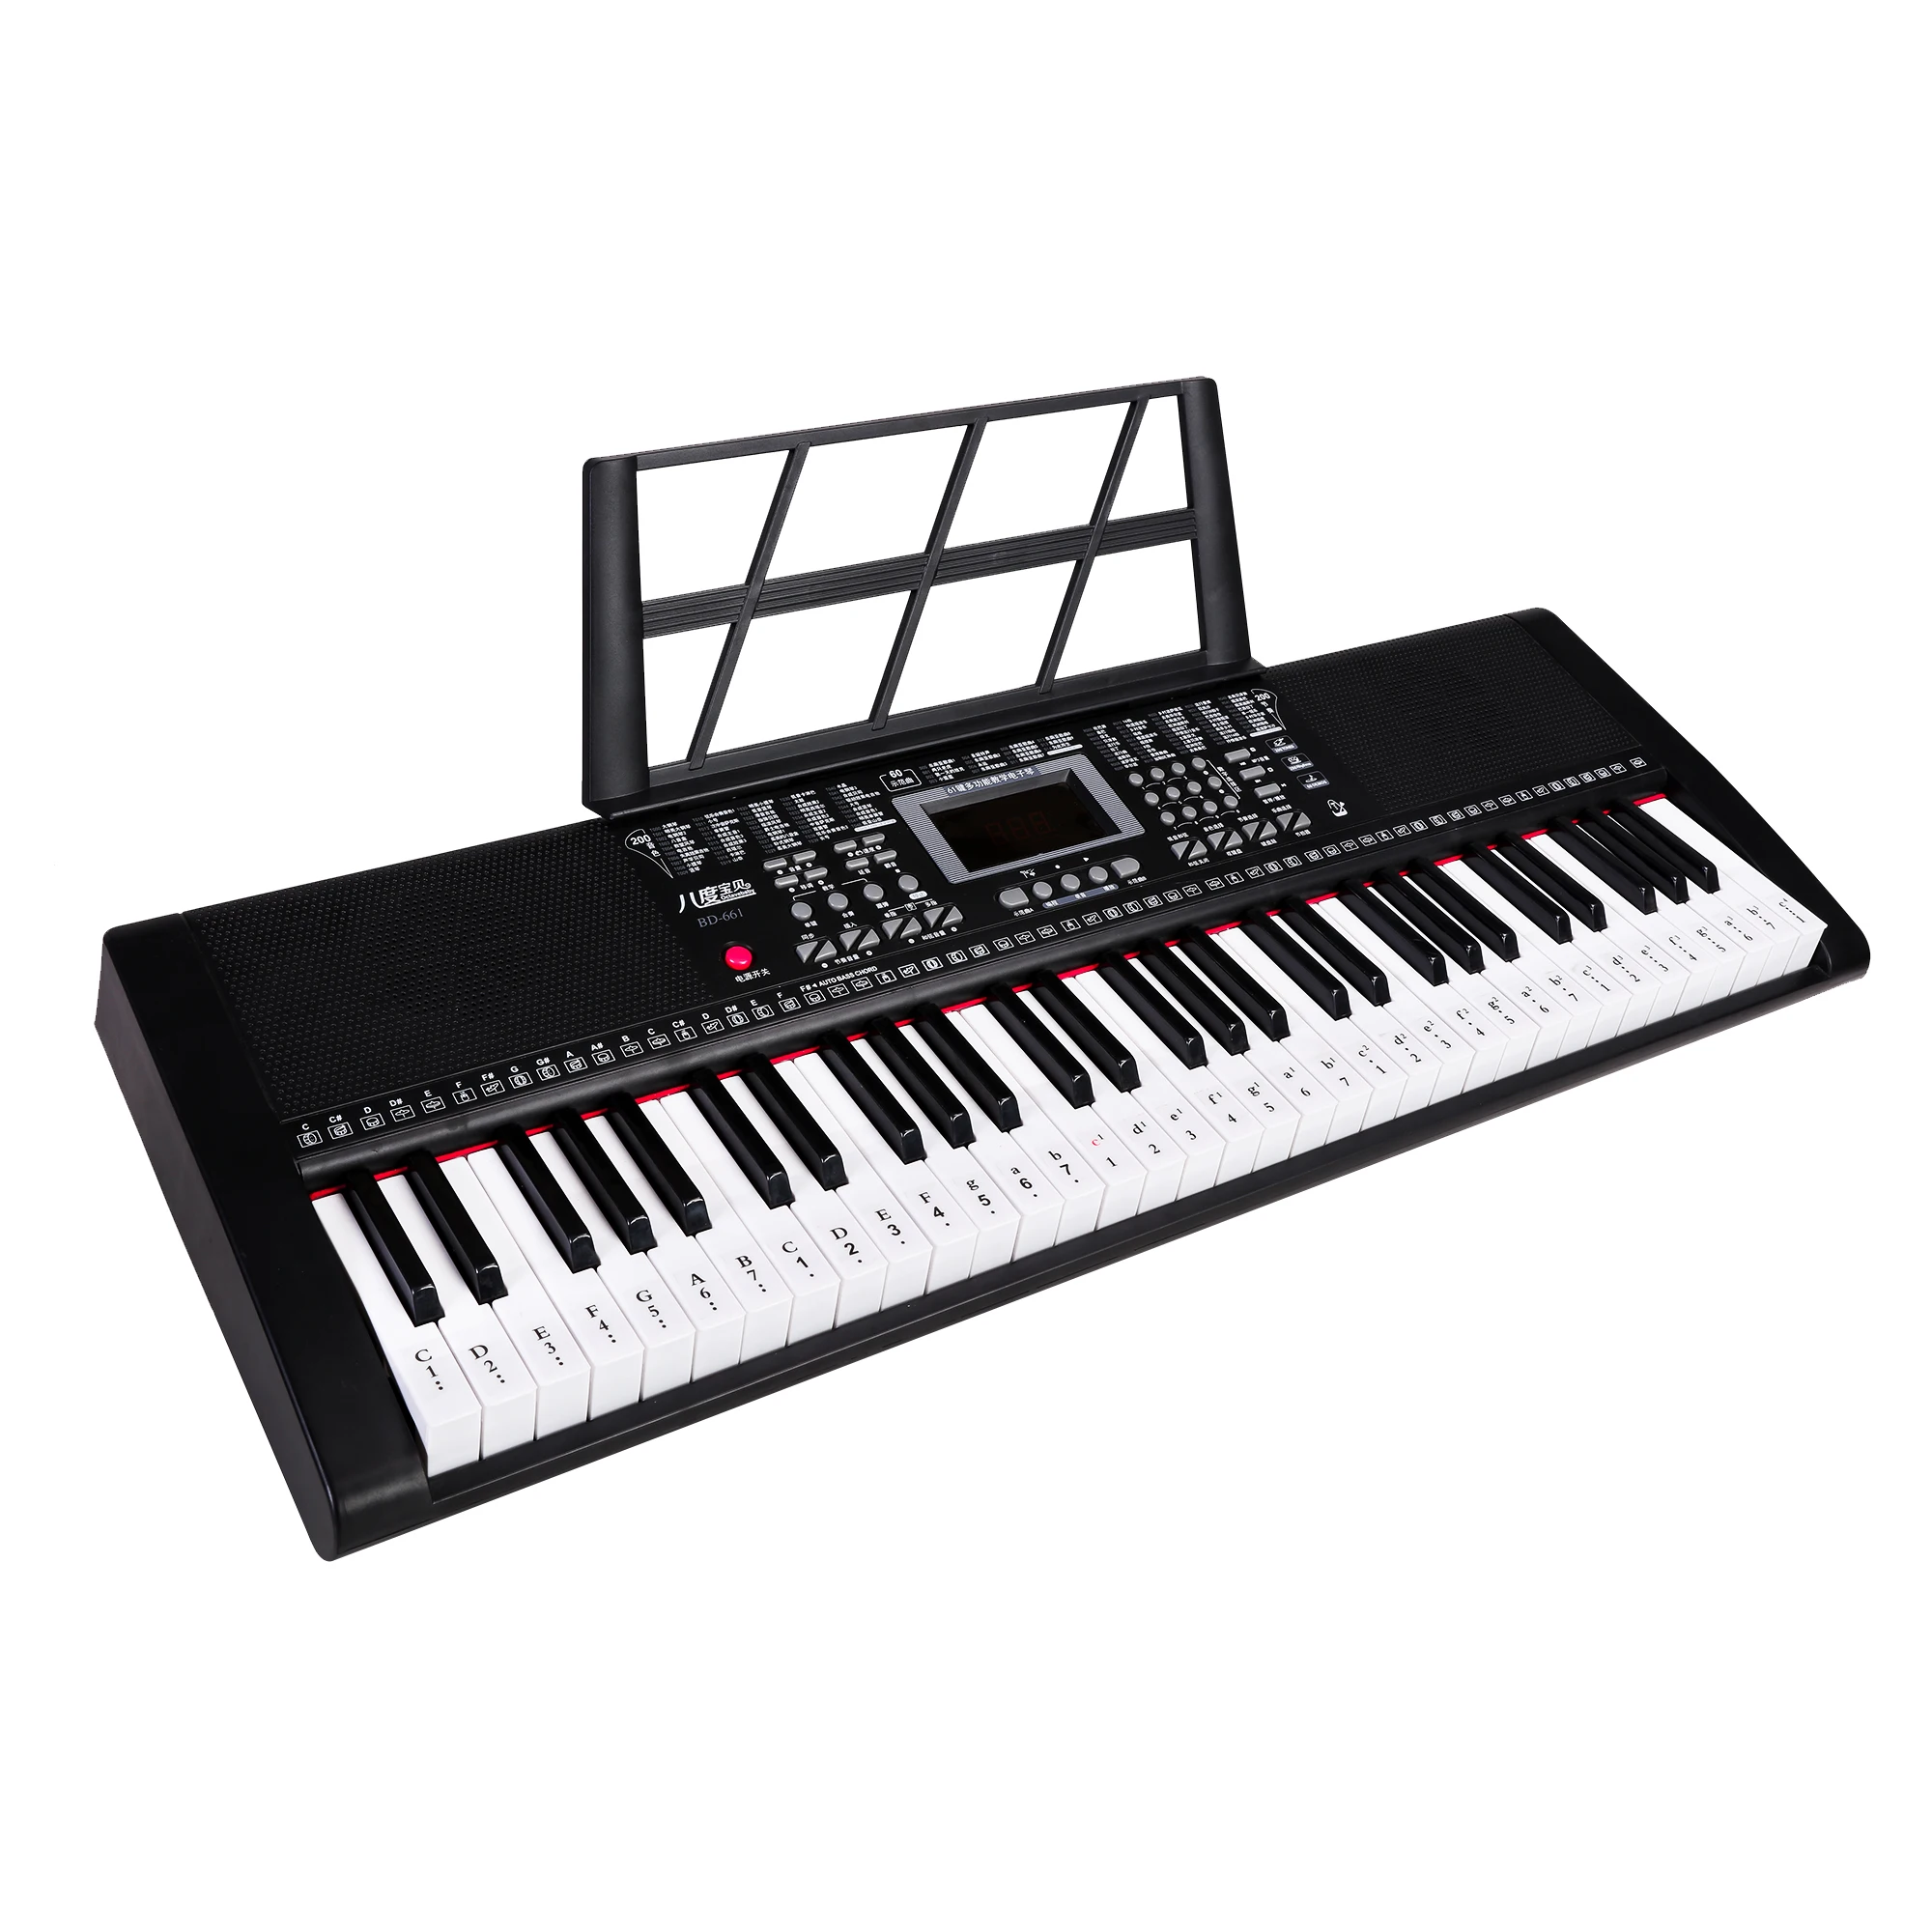 

Musical Instruments popular for kids and adults 61 keys electronic piano keyboard teclados synthesizer for sale, Black/pink/customized